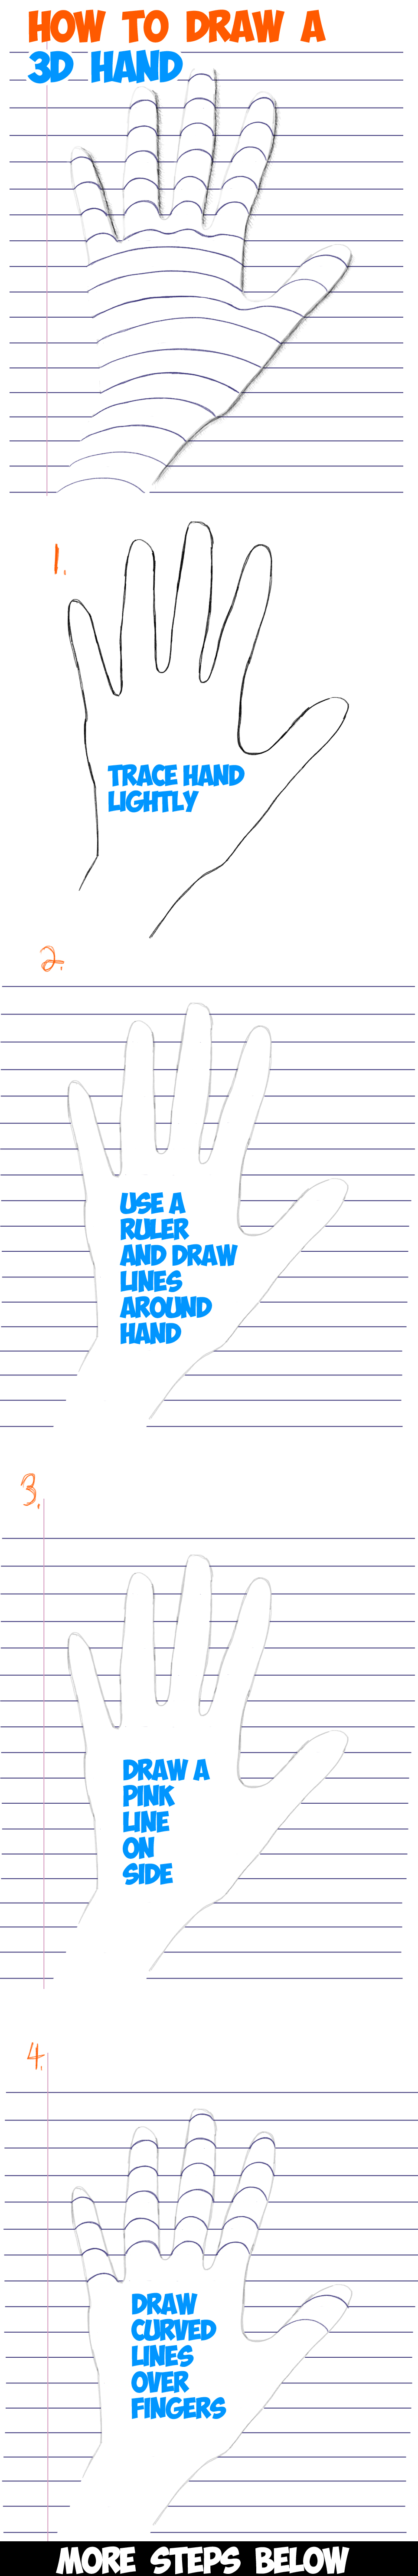 Learn How to Draw a 3D Hand on Notebook Paper - Step by Step Drawing Trick for Kids